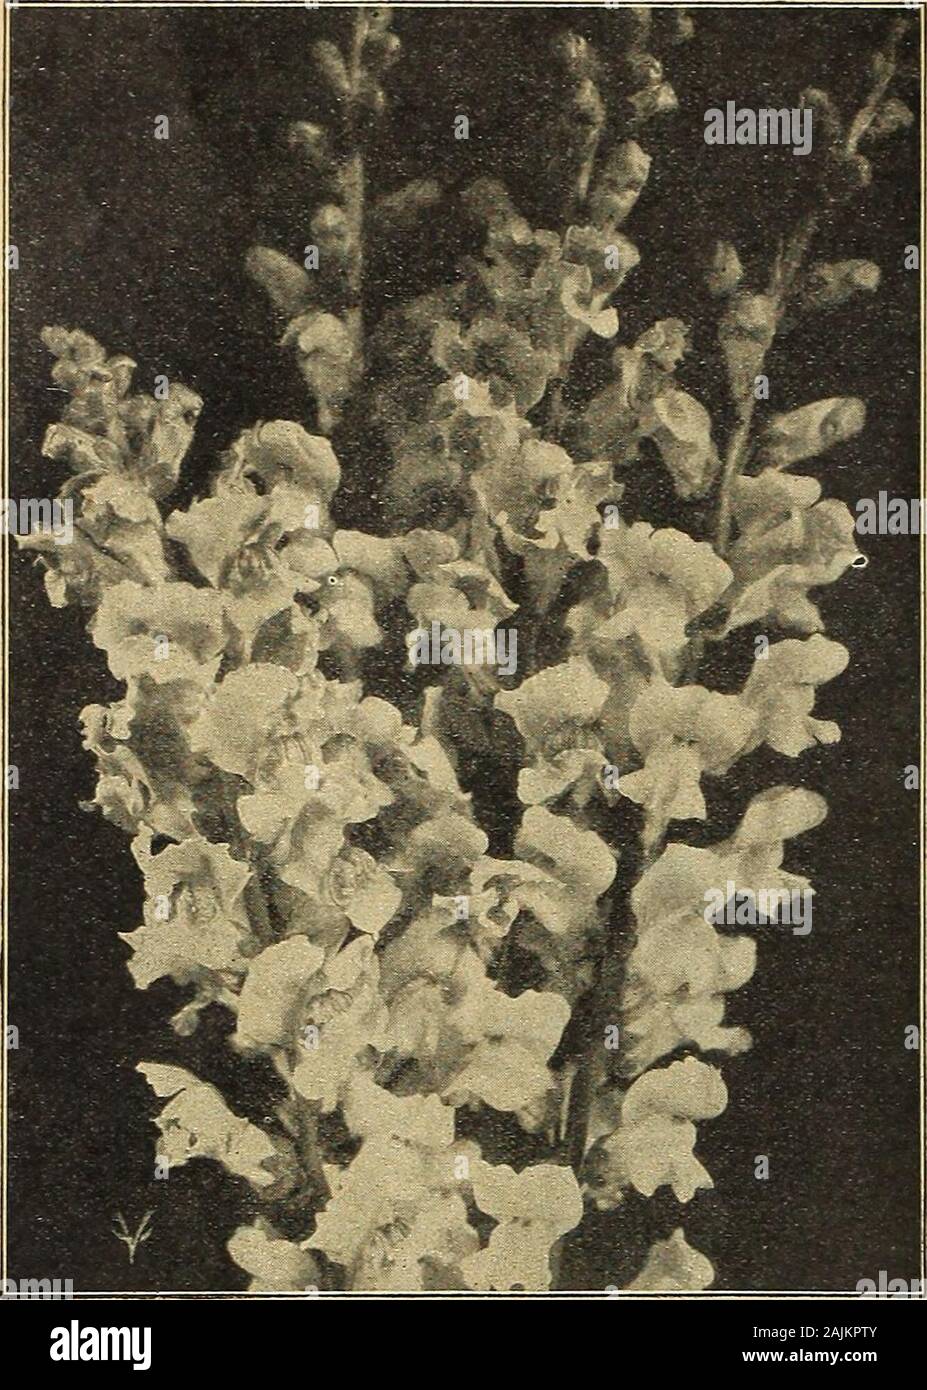 Vaughan's seed store . hardy annual of light graceful habit;flowers light rose, shaded white Yi oz. 15c 118119 129 Lasseauxi. 3 ft. Clusters 131 135 0505 1005 05 136 and graceful annual grass, looks like a line of mist whenin bloom. Beautiful to mix with cut flowers 05 150 ALONSOA Warscewiczi O 15 in. A fine plant with bright vermilion-scarlet flowers, suitable for bedding. For a red,white and blue border plant Alonsoa for red Alyssum, Sweetfor white and Ageratum Blue Perfection for blue, %oz., 15c 10 151 Grandiflora. Scarlet 10 Alyssum O 159 Benthami Maritimum (Sweet Alyssum) This is oneof th Stock Photo